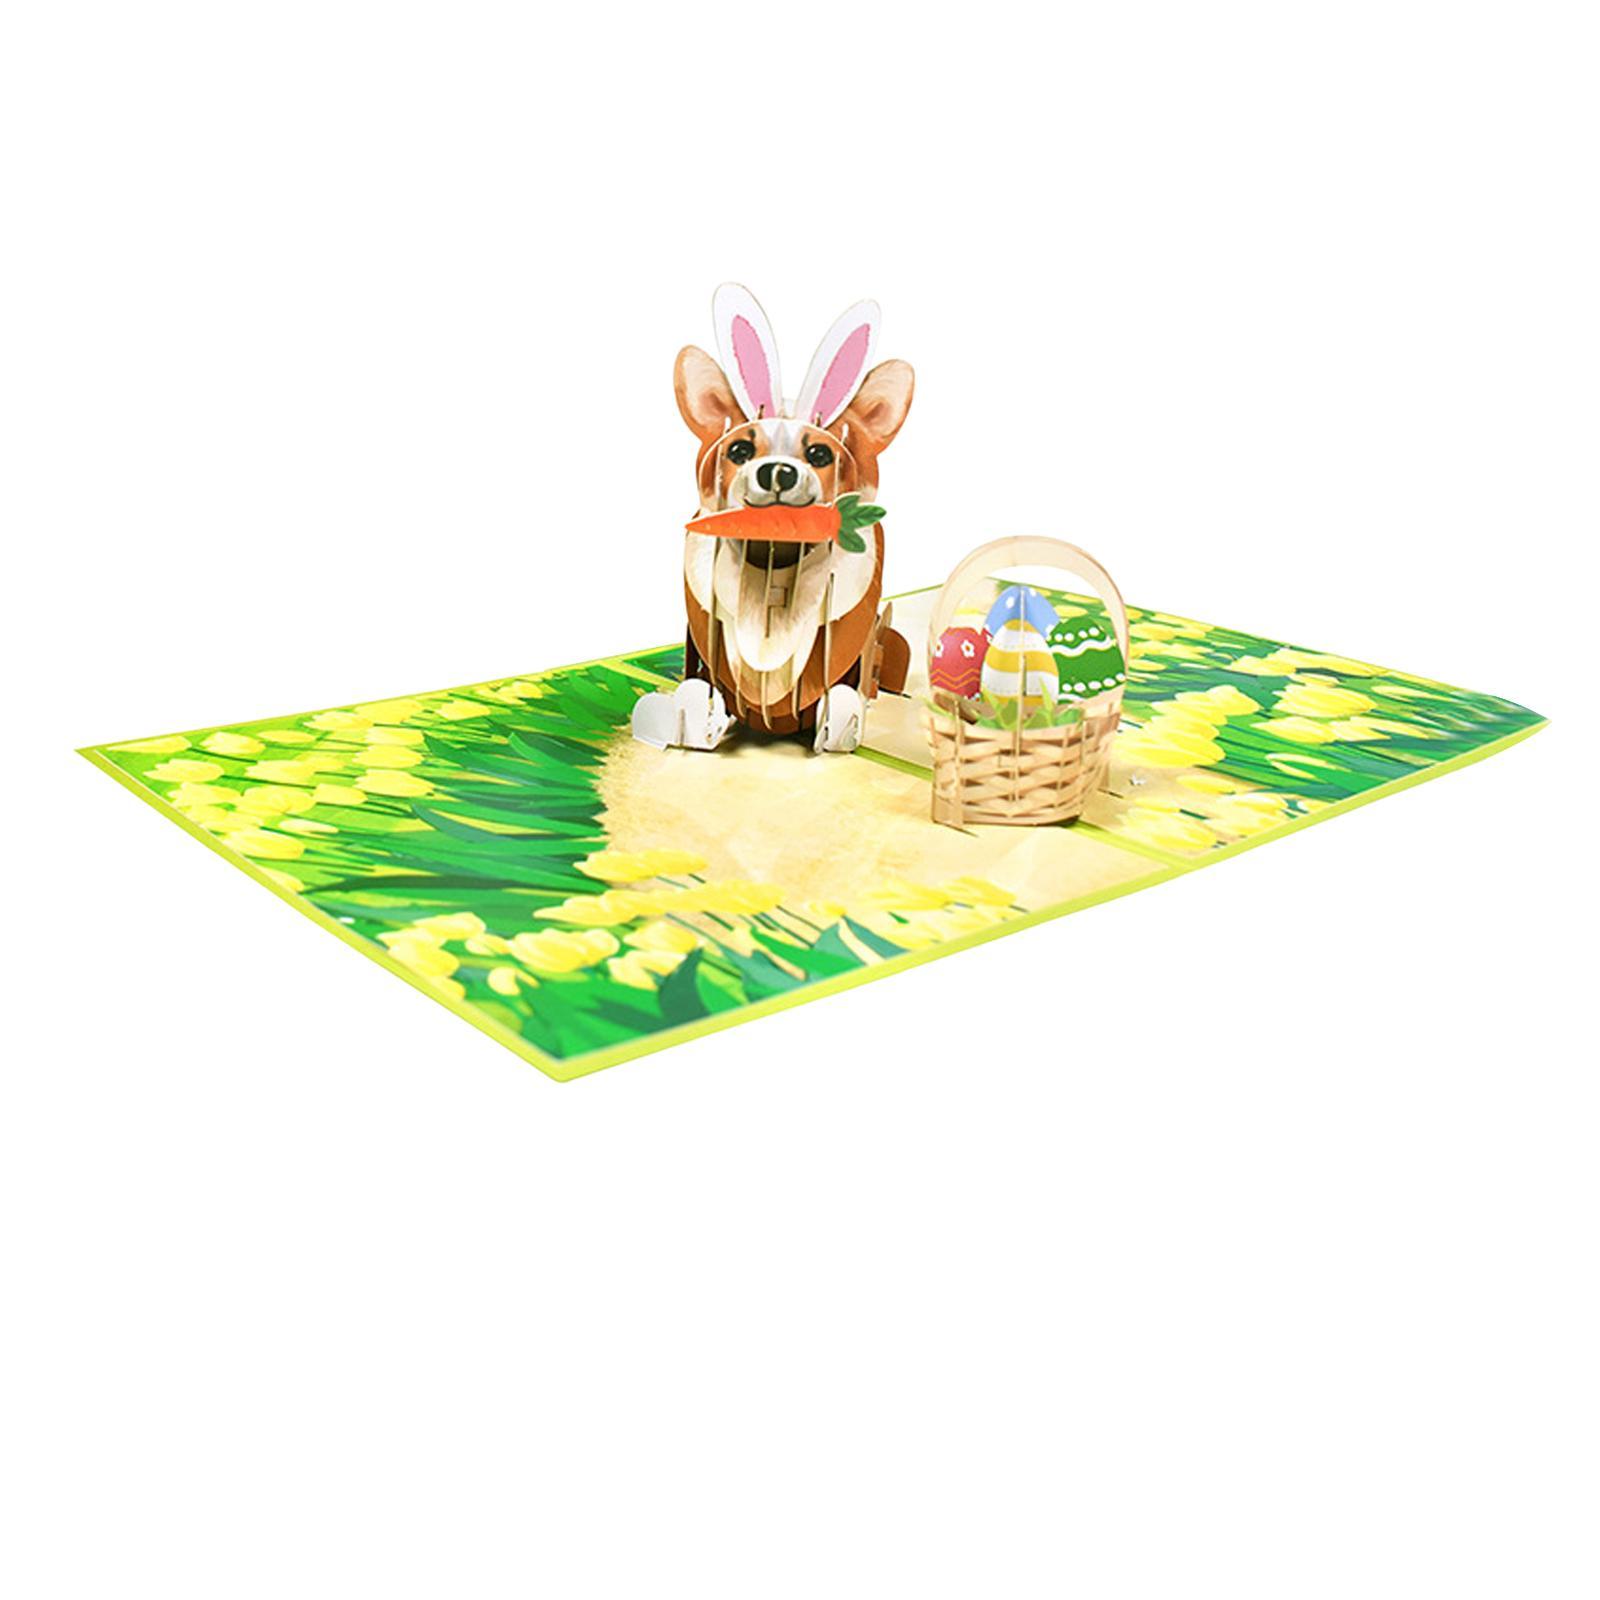 3D Easter up cards Bunny Easter up Funny Gift Card for Kids Girl Wife